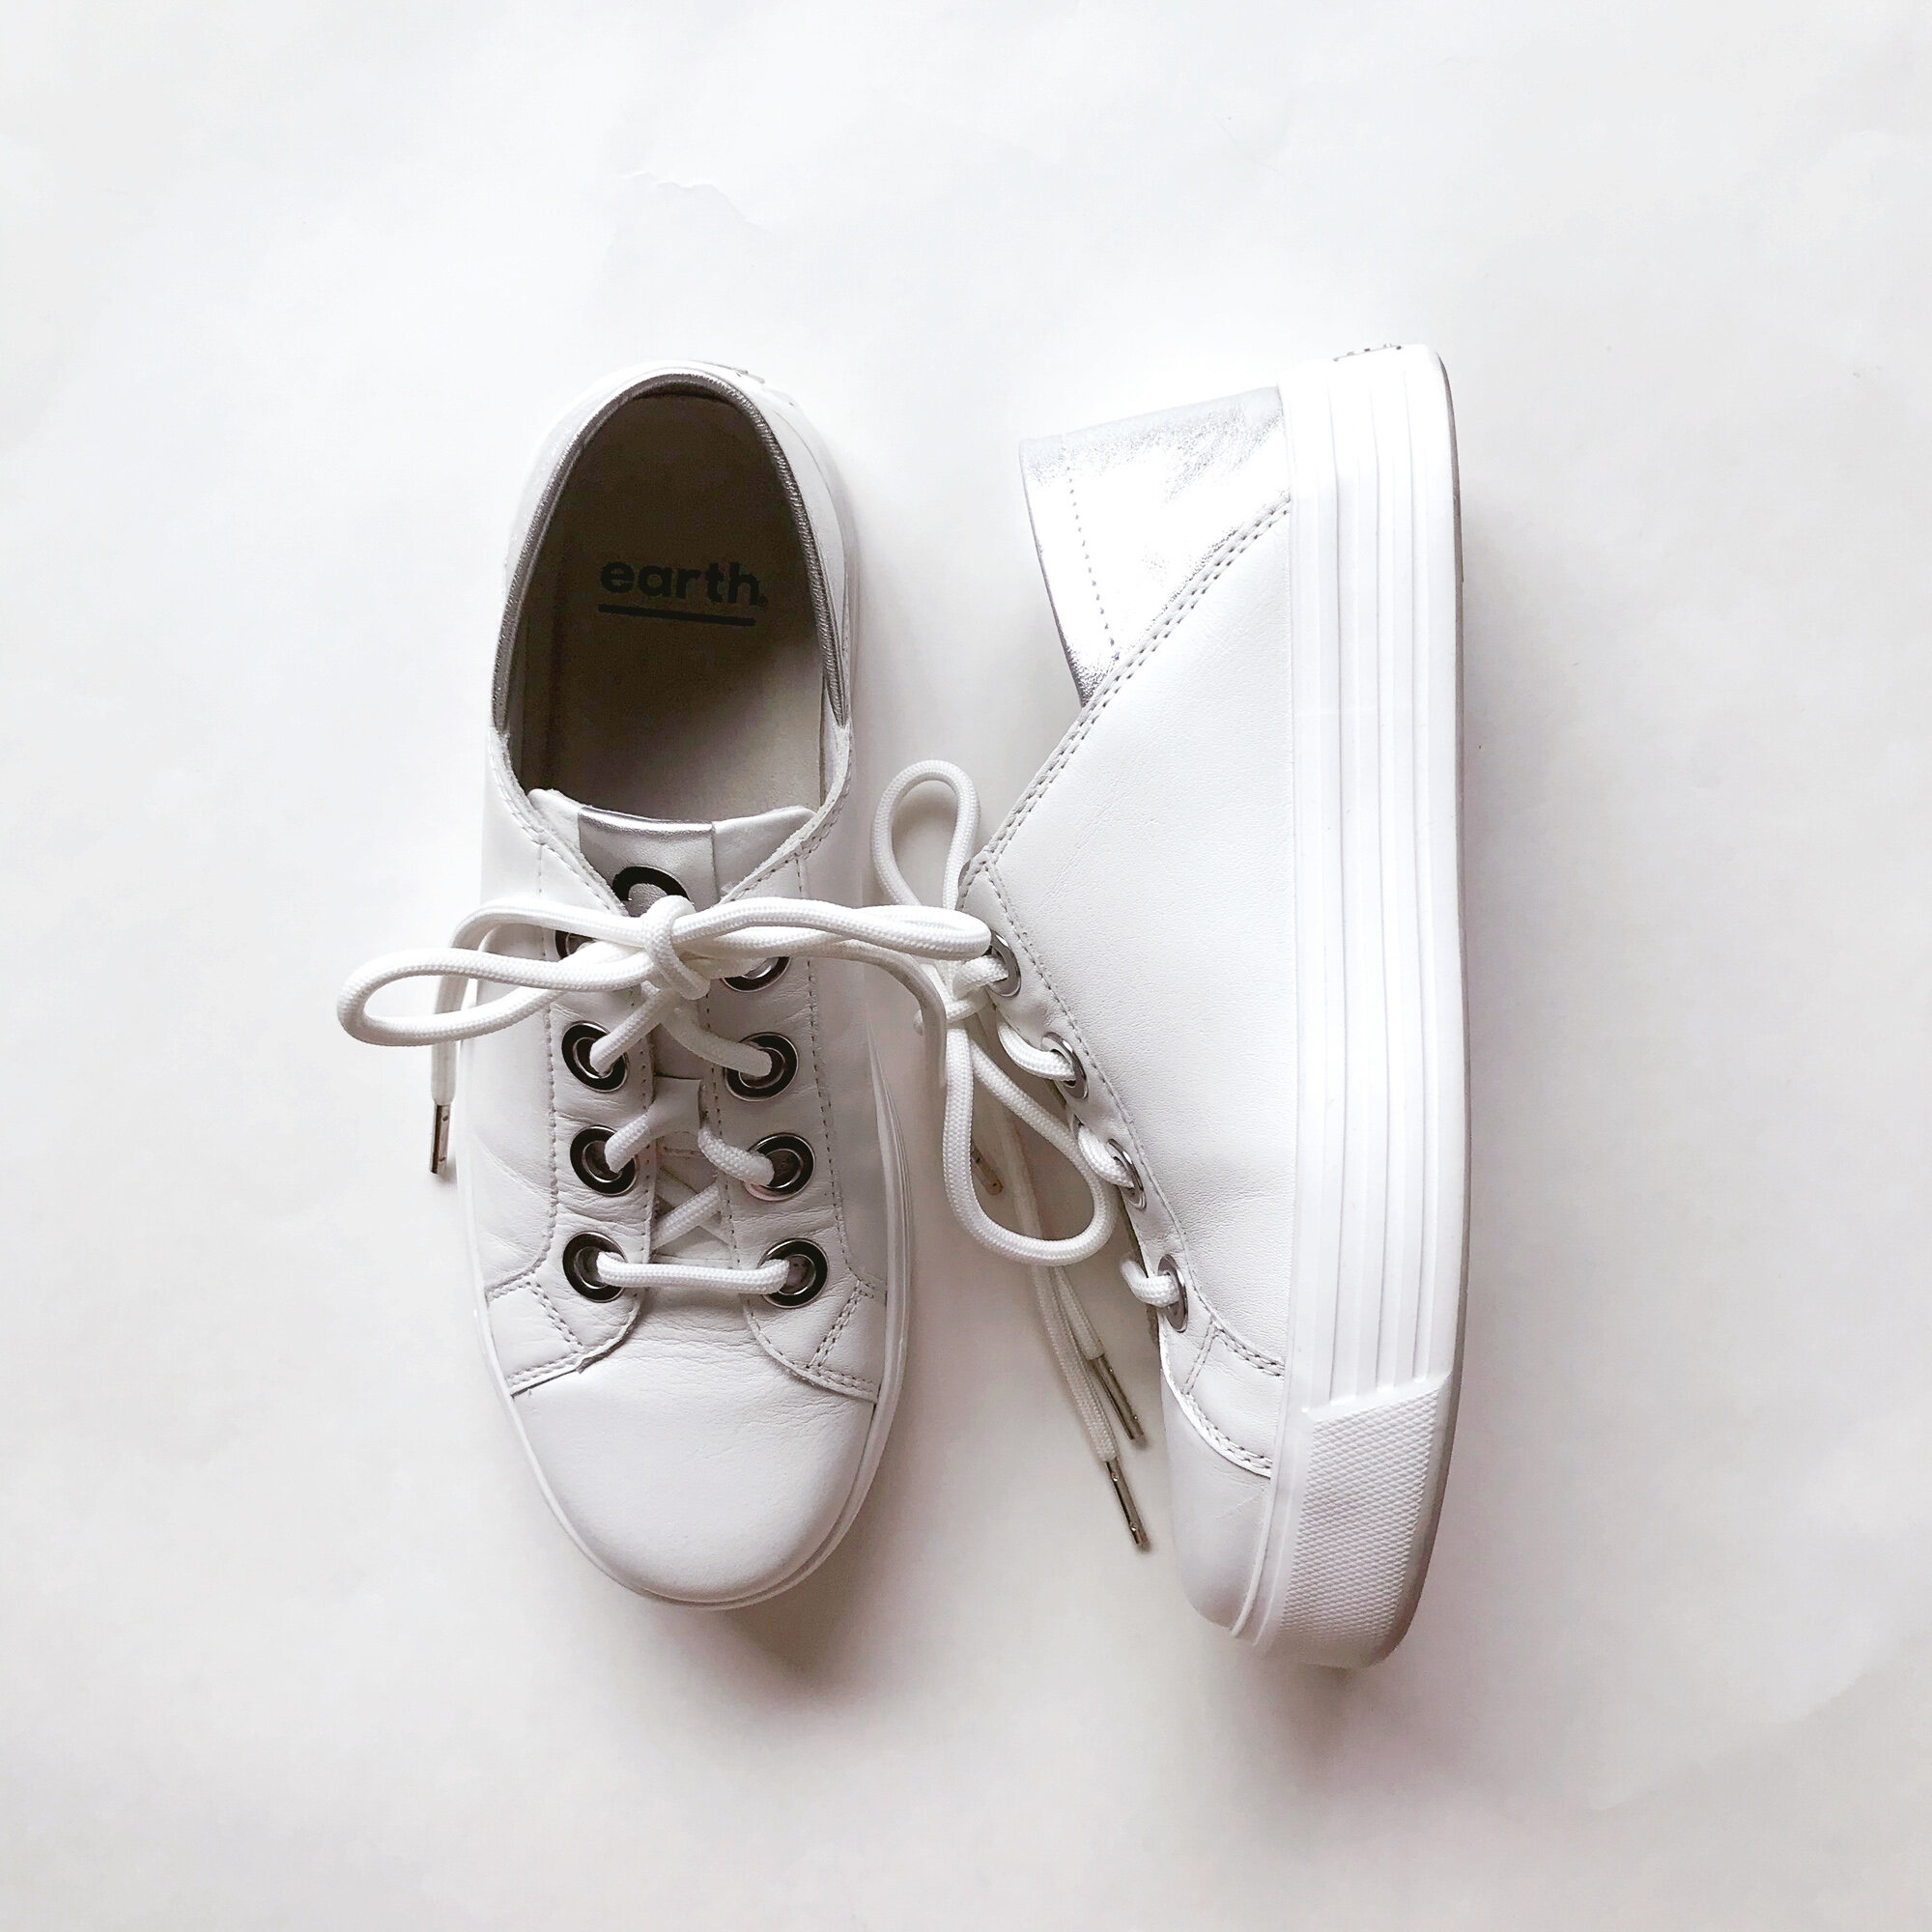 Earth Cedarwood sneakers review + outfit ideas — Cotton Cashmere Cat Hair